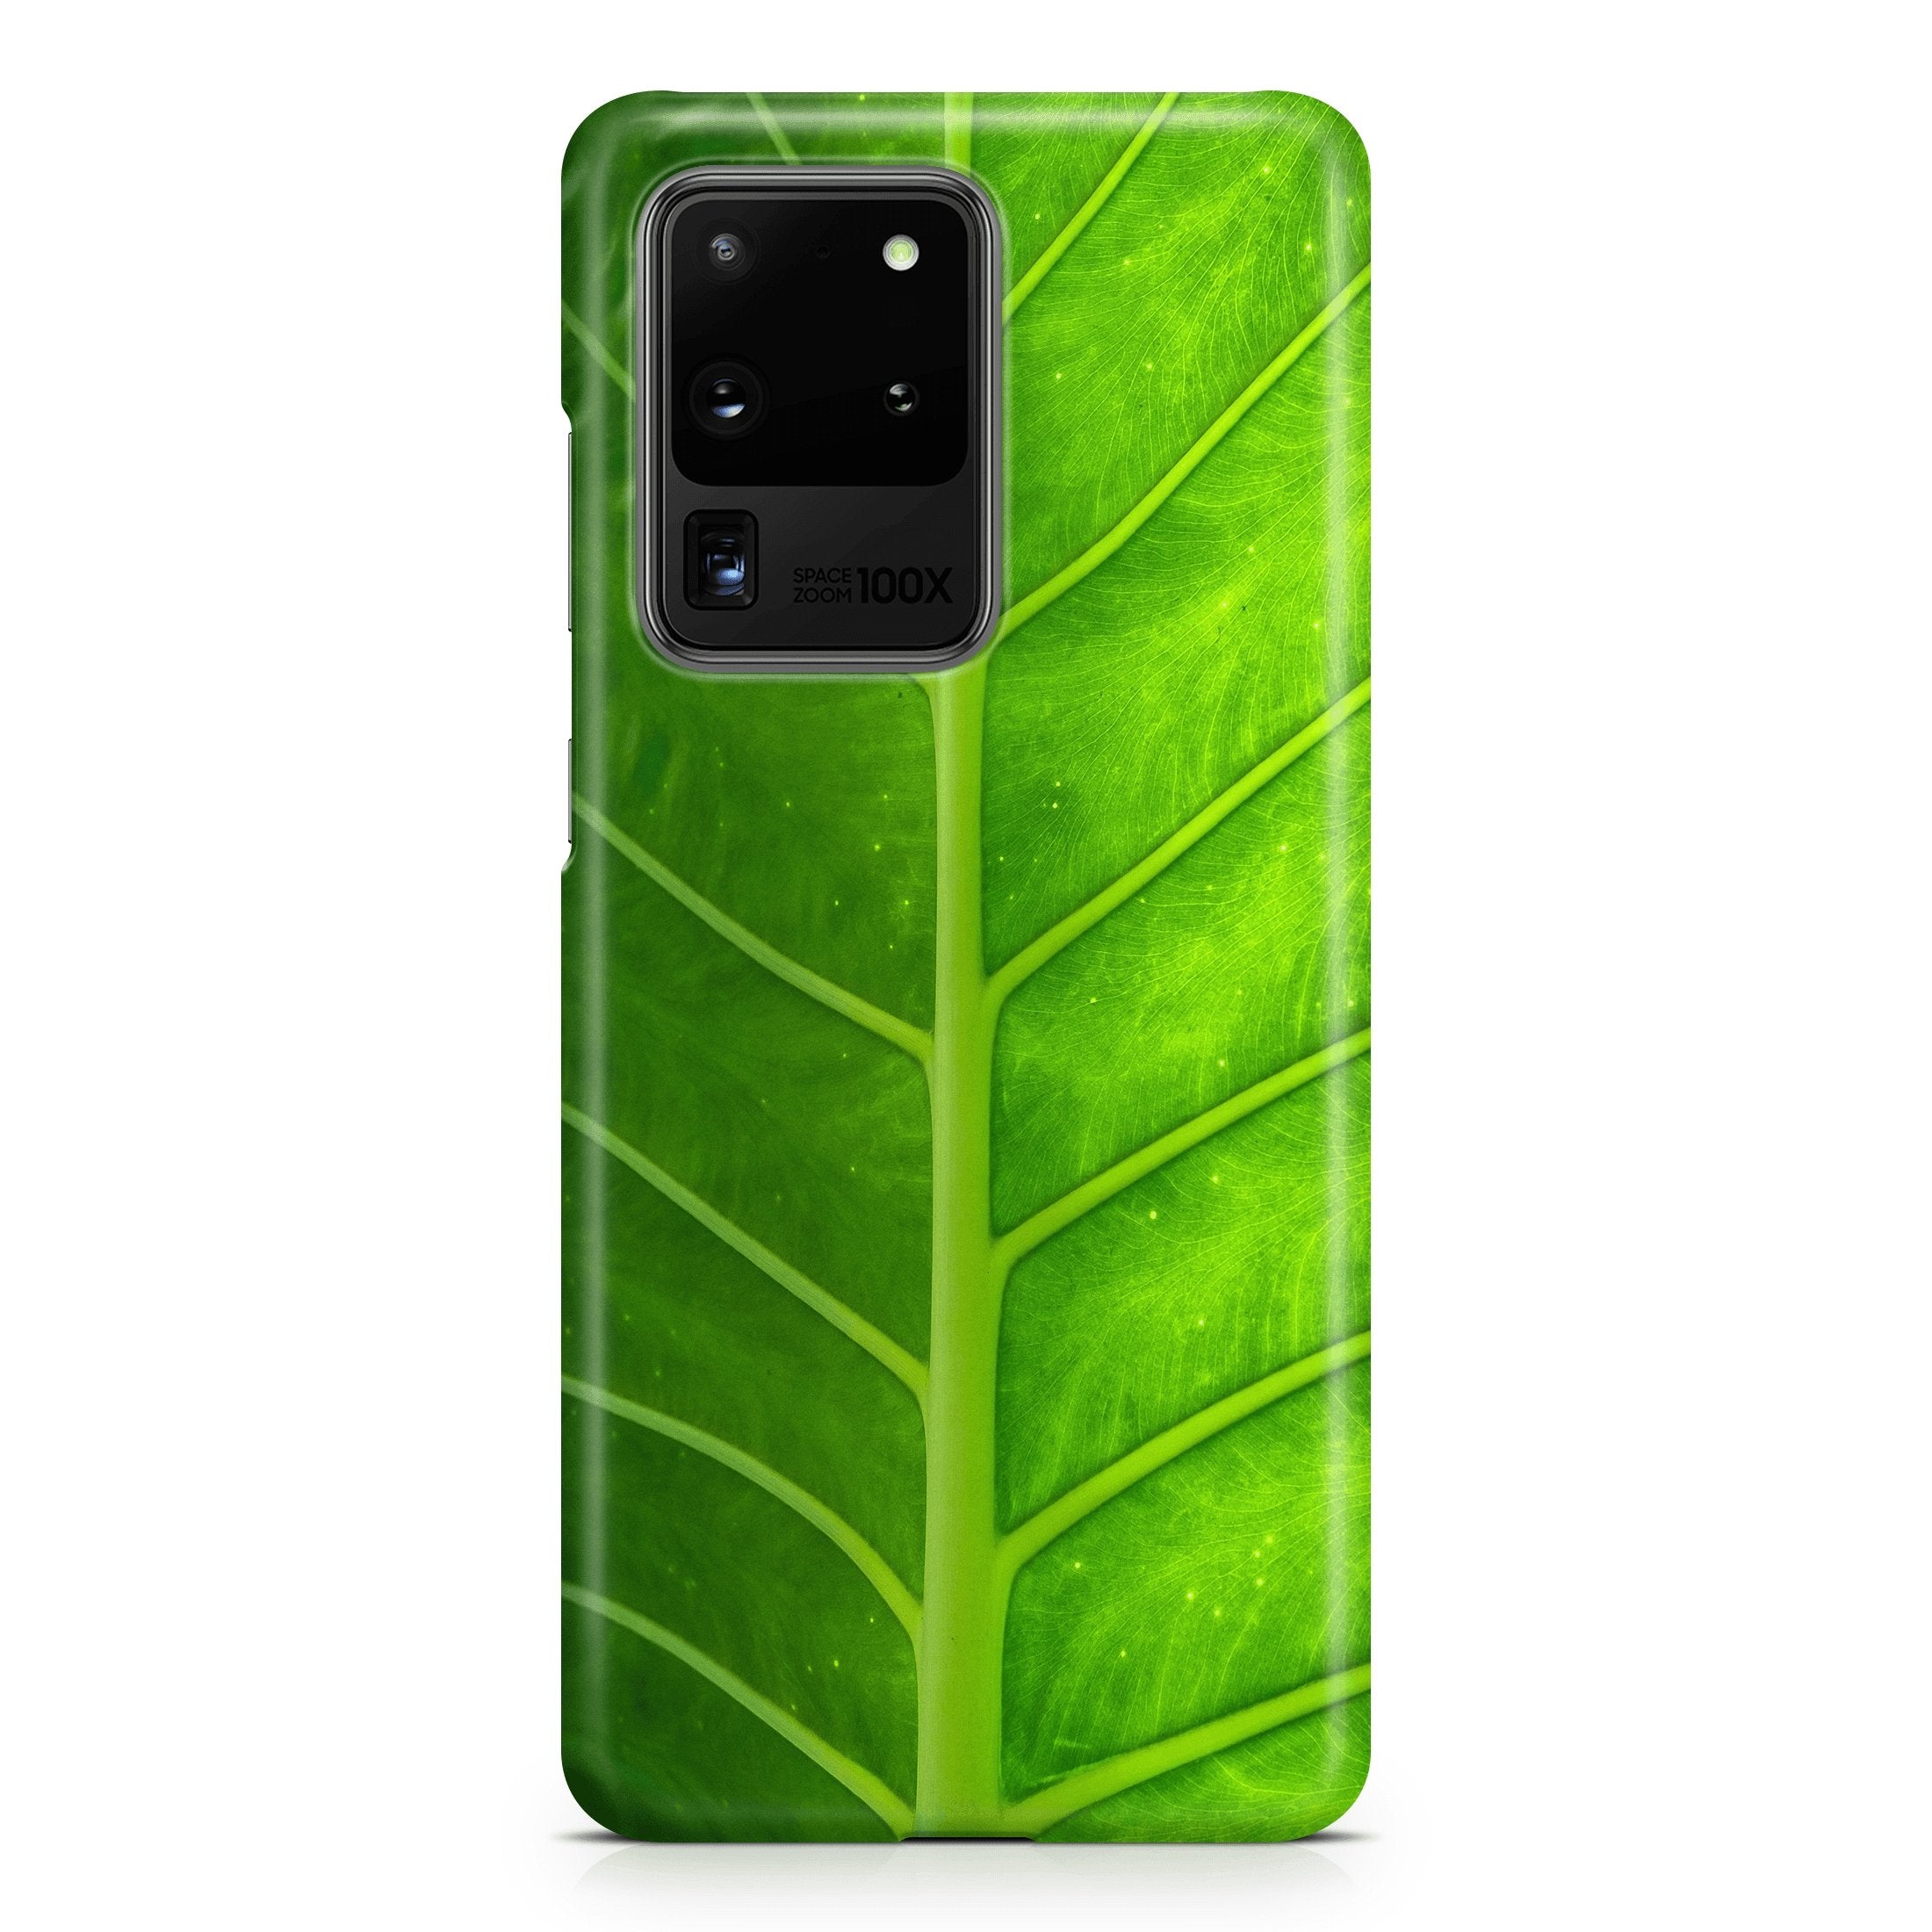 Leaf Spine - Samsung phone case designs by CaseSwagger